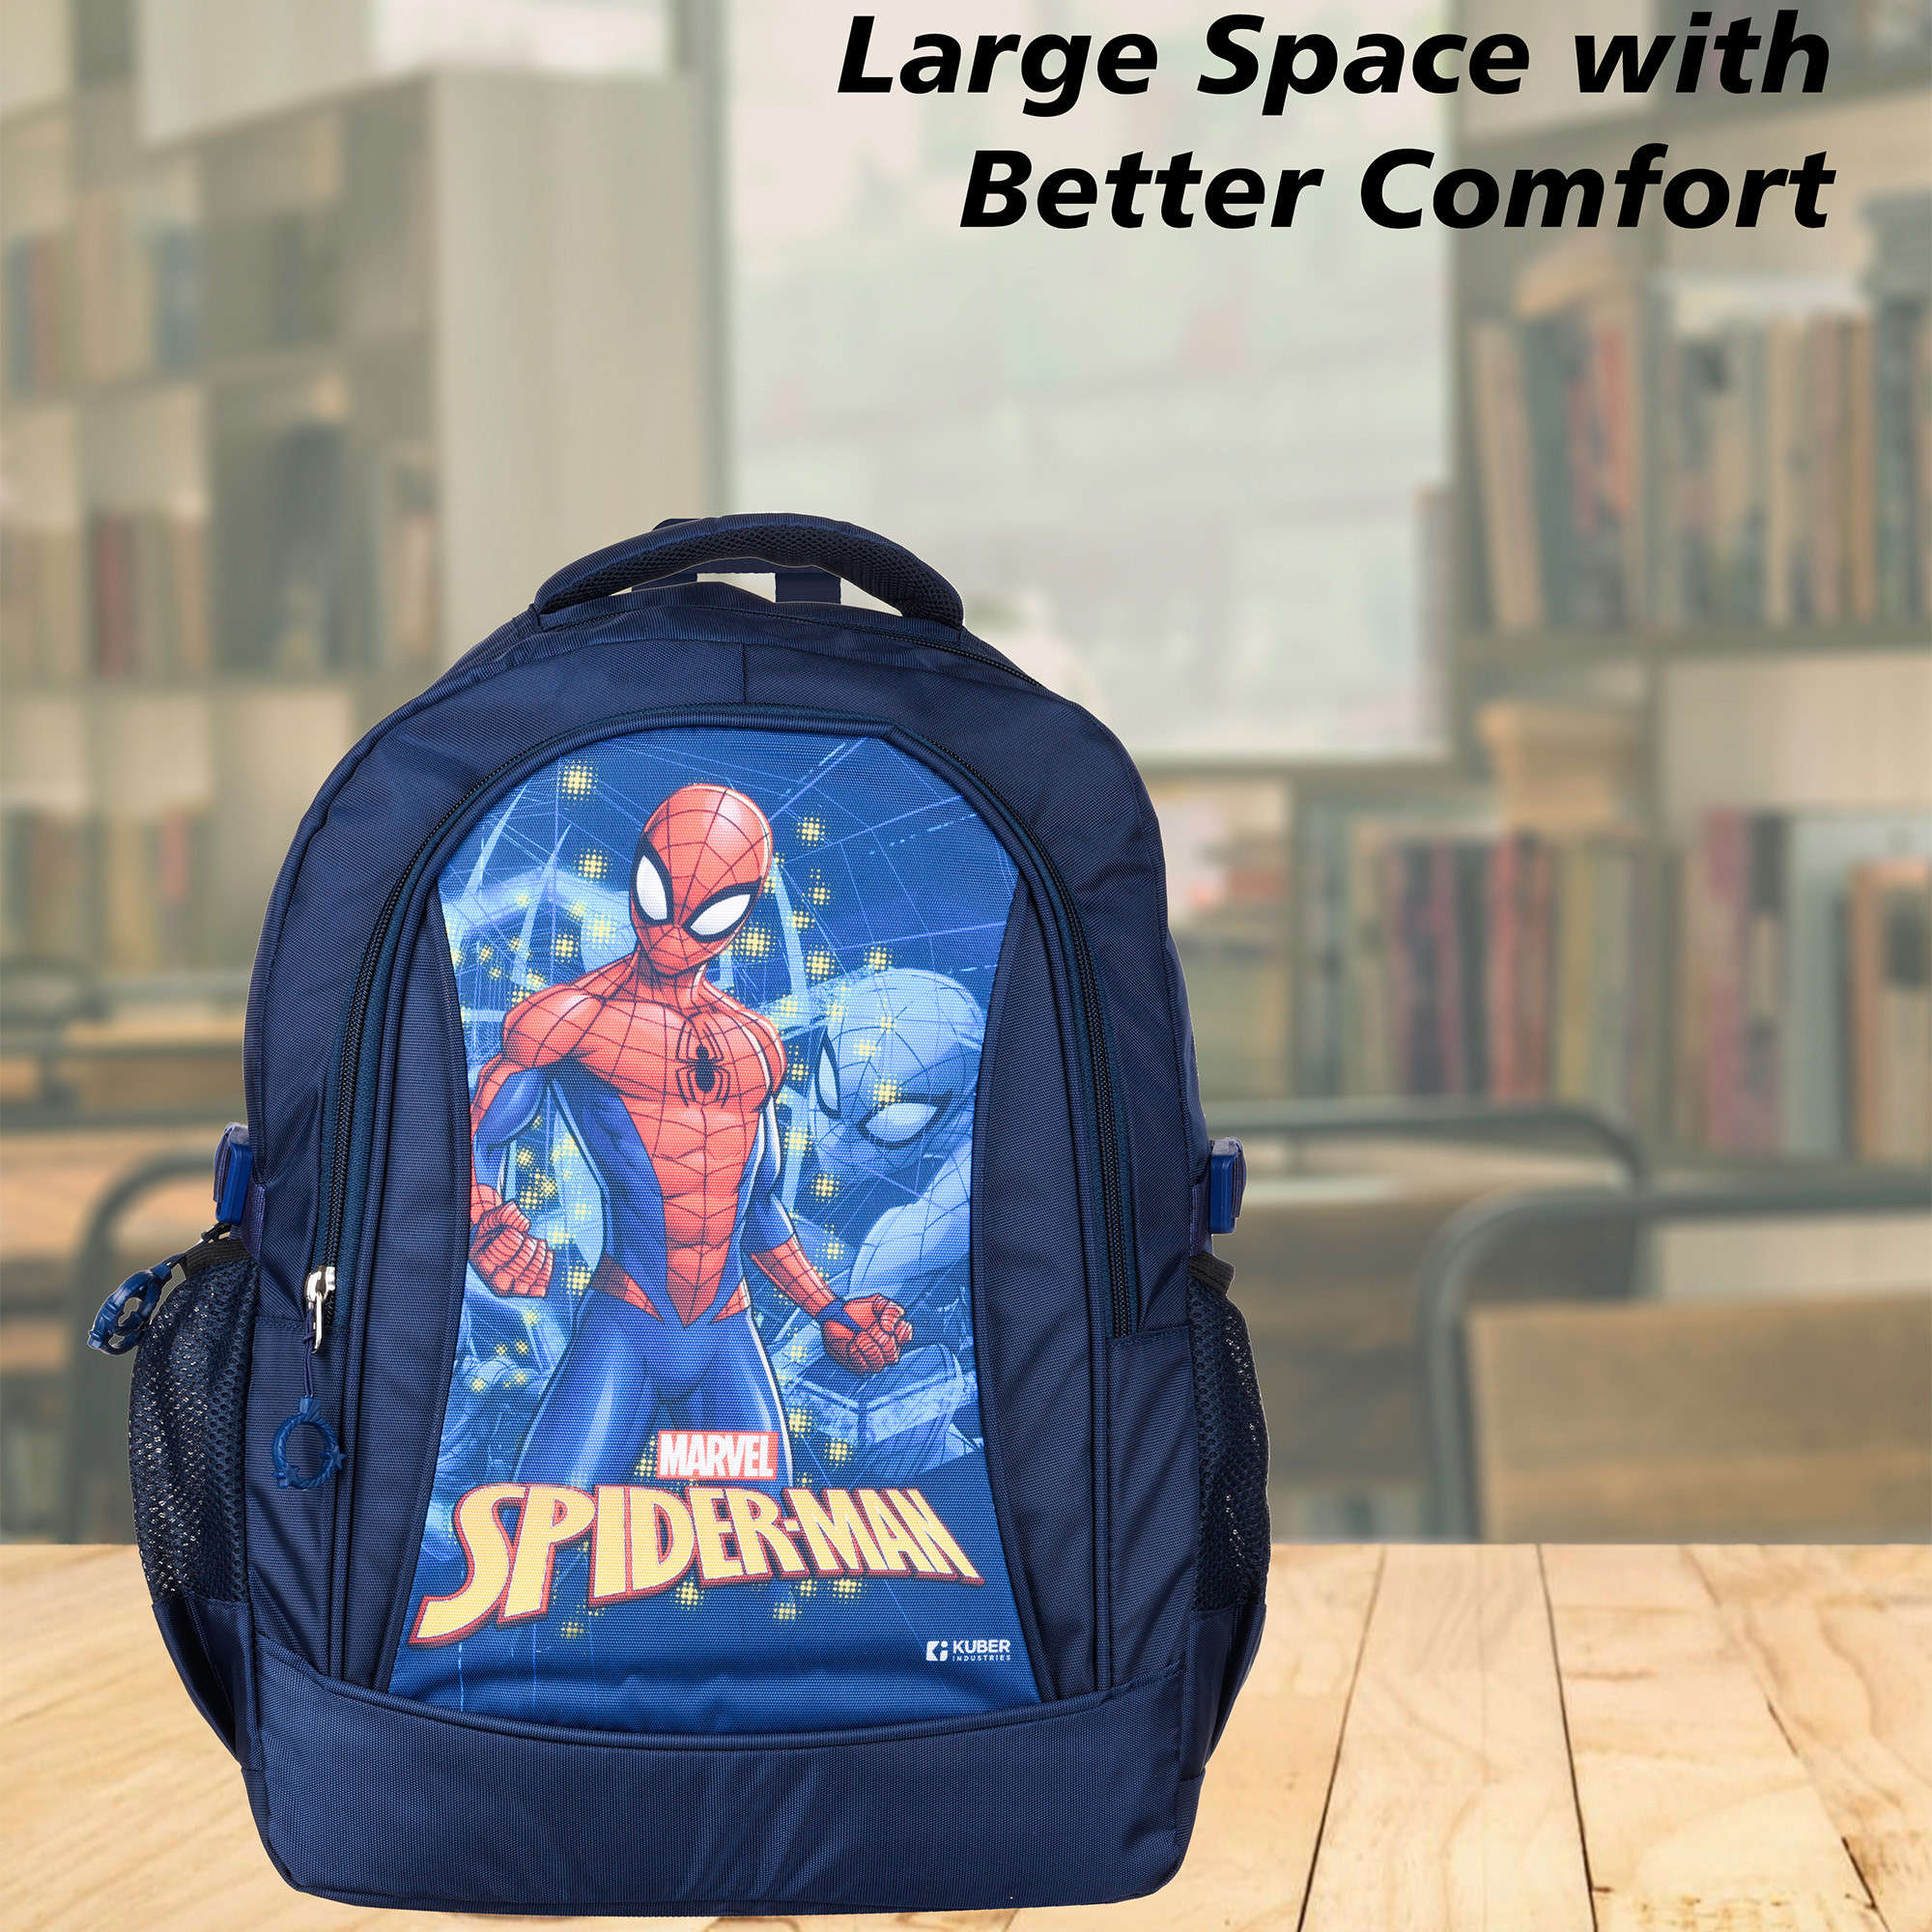 Kuber Industries Marvel The Spider-Man School Bags | Kids School Bags | Student Bookbag | Travel Backpack | School Bag for Girls & Boys | School Bag with 3 Compartments | Navy Blue